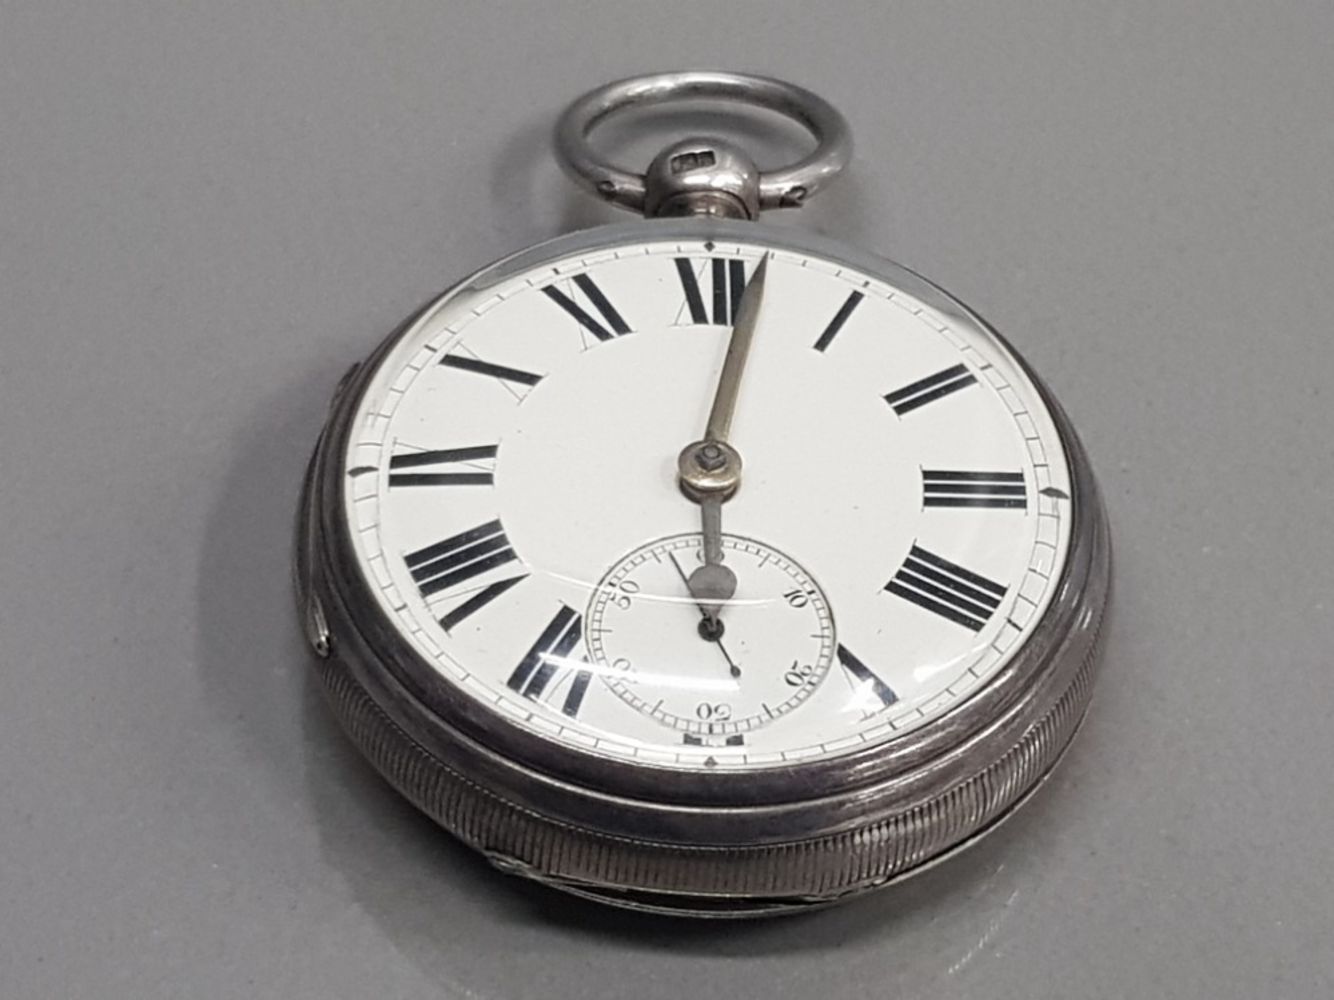 Rolex, Pocket Watch, Jewellery, Memorabilia & Collectibles Auction Including Furniture, Porcelain & Others